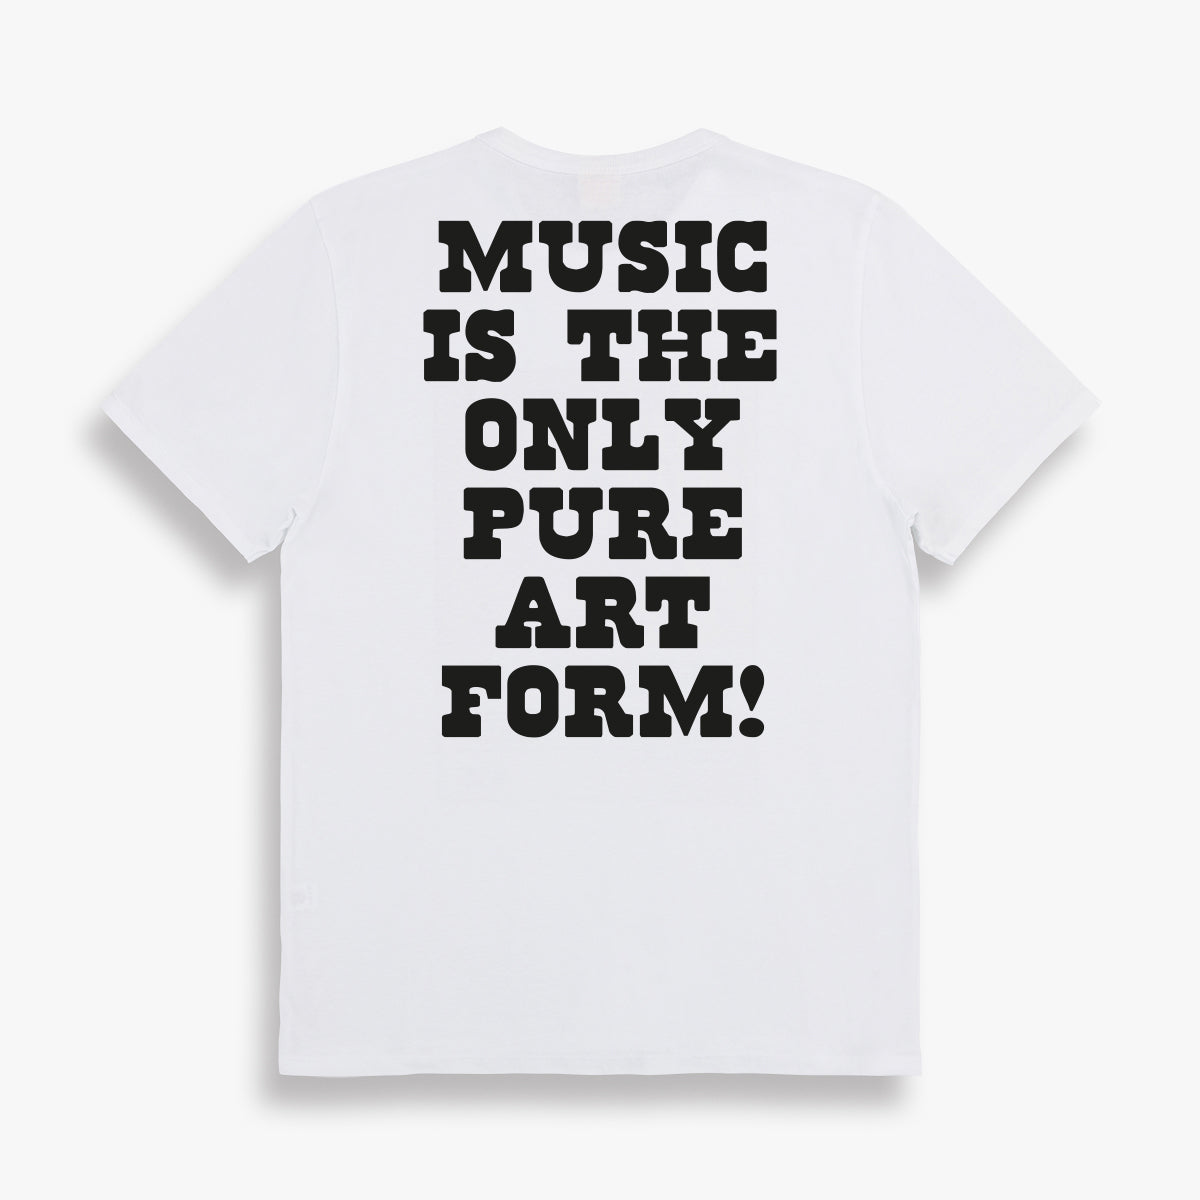 Music Is The Only Pure Art Form Tee